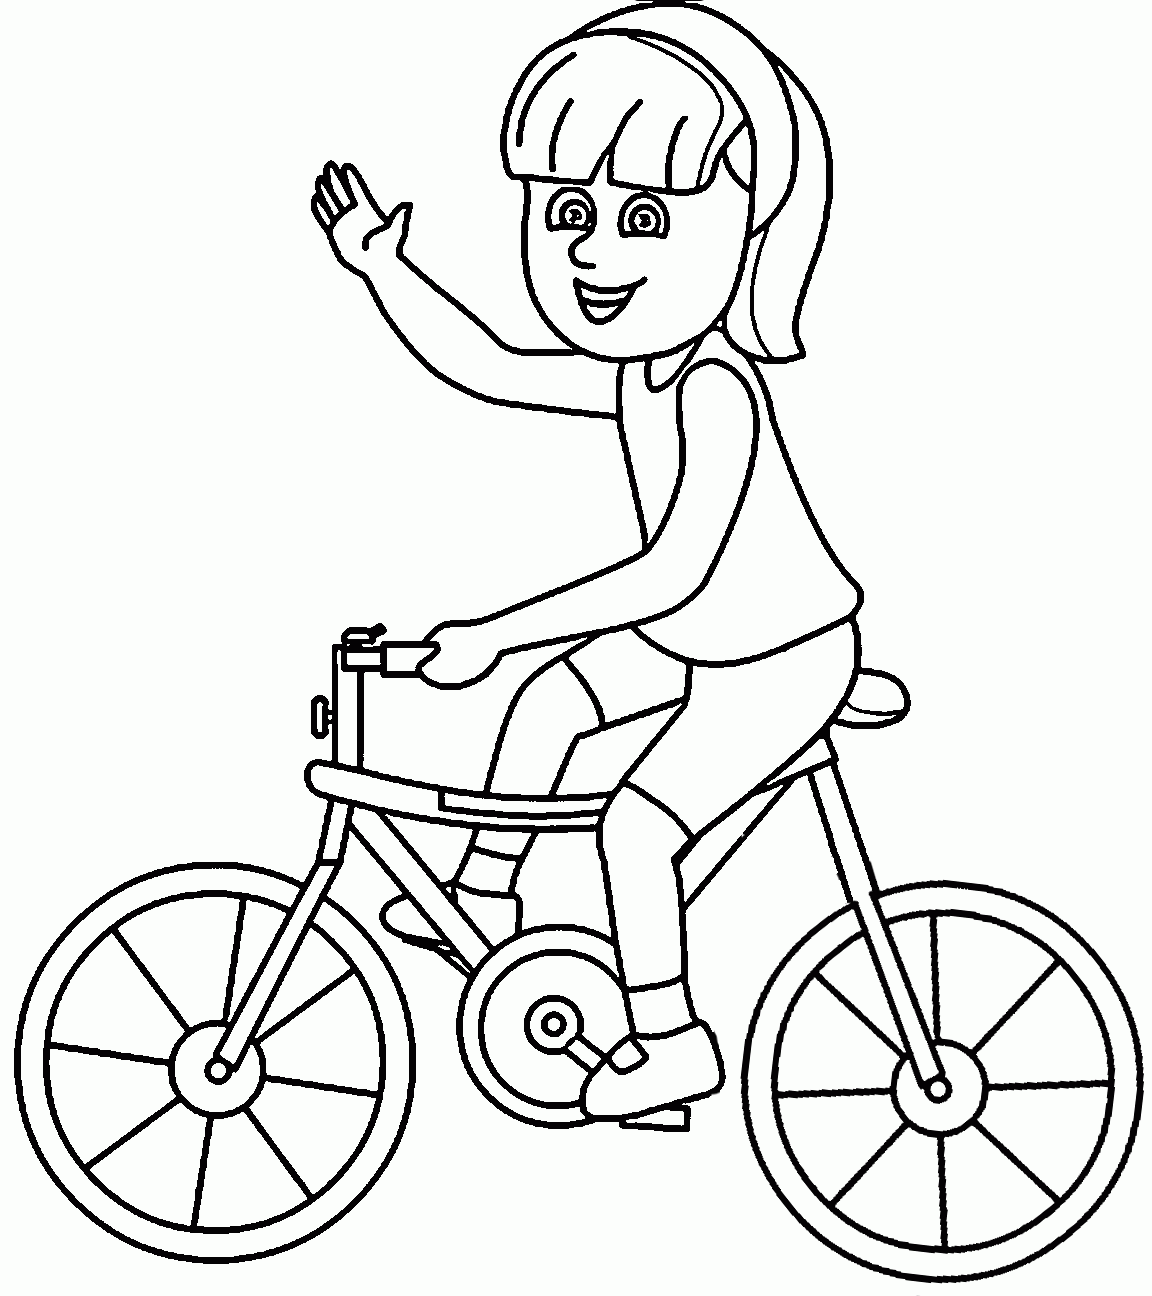 Bike Riding Coloring Page - Coloring Home